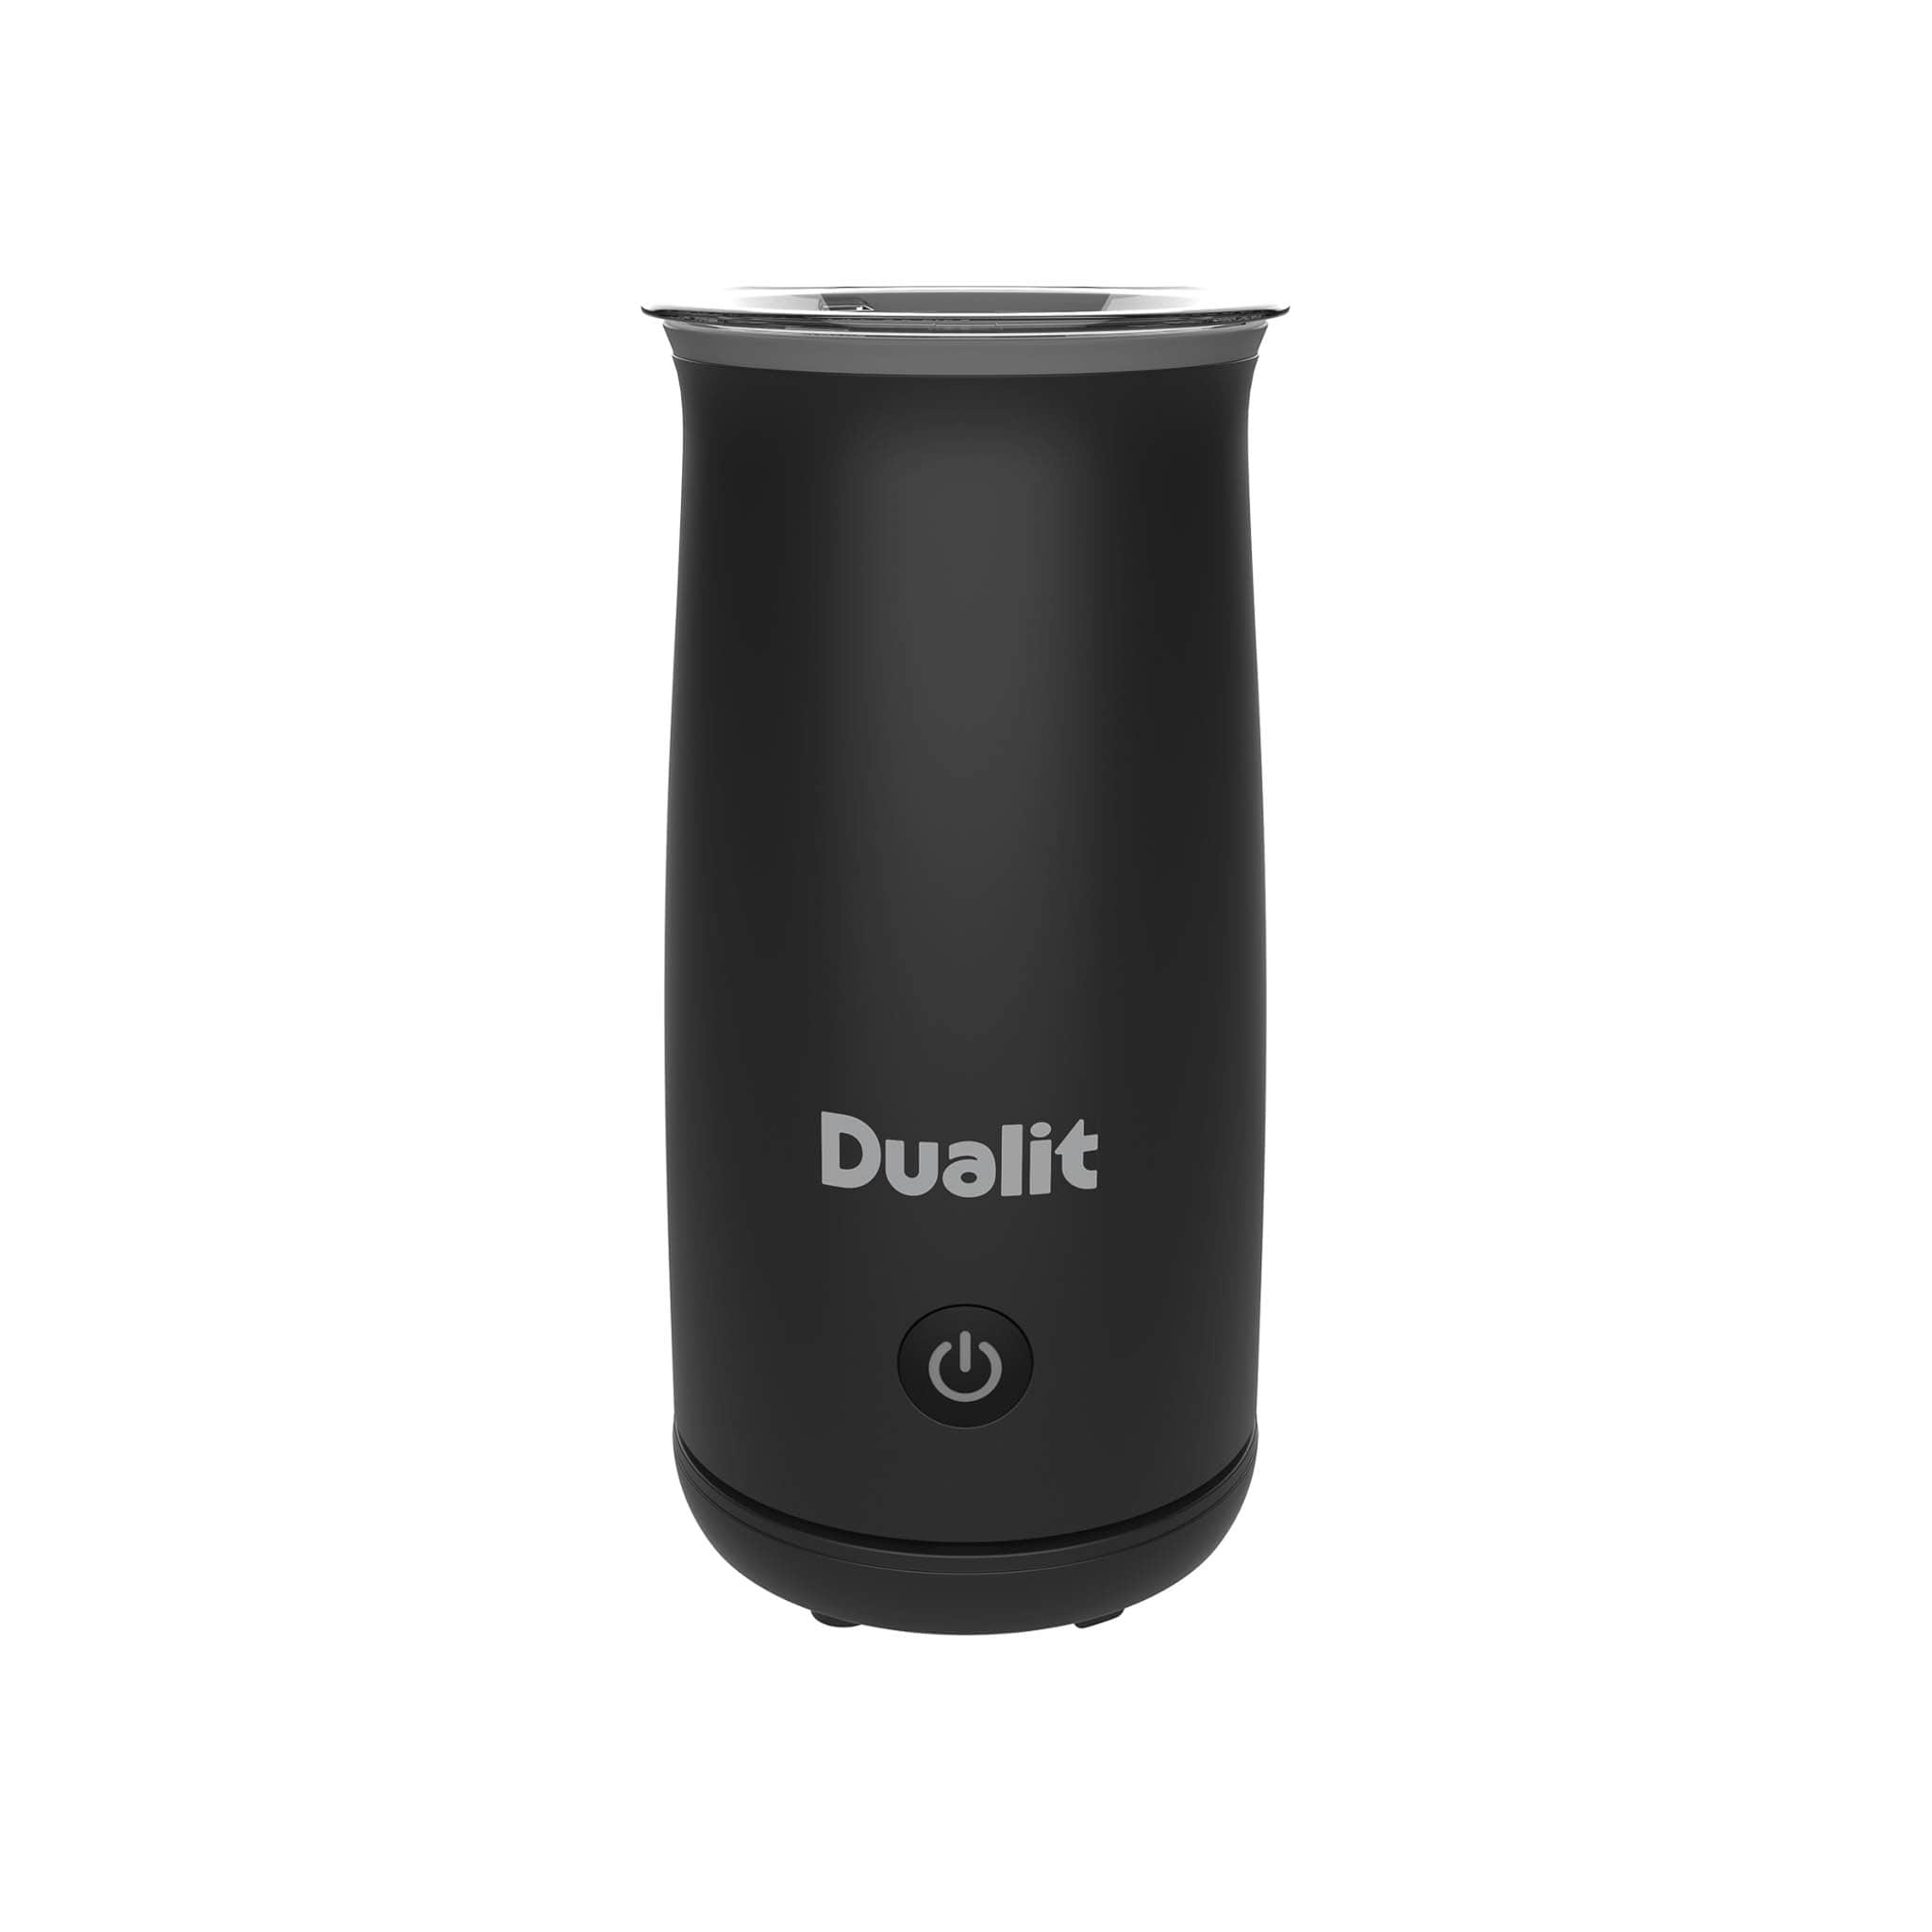 Dualit Handheld Milk Frother & Hot Chocolate Maker